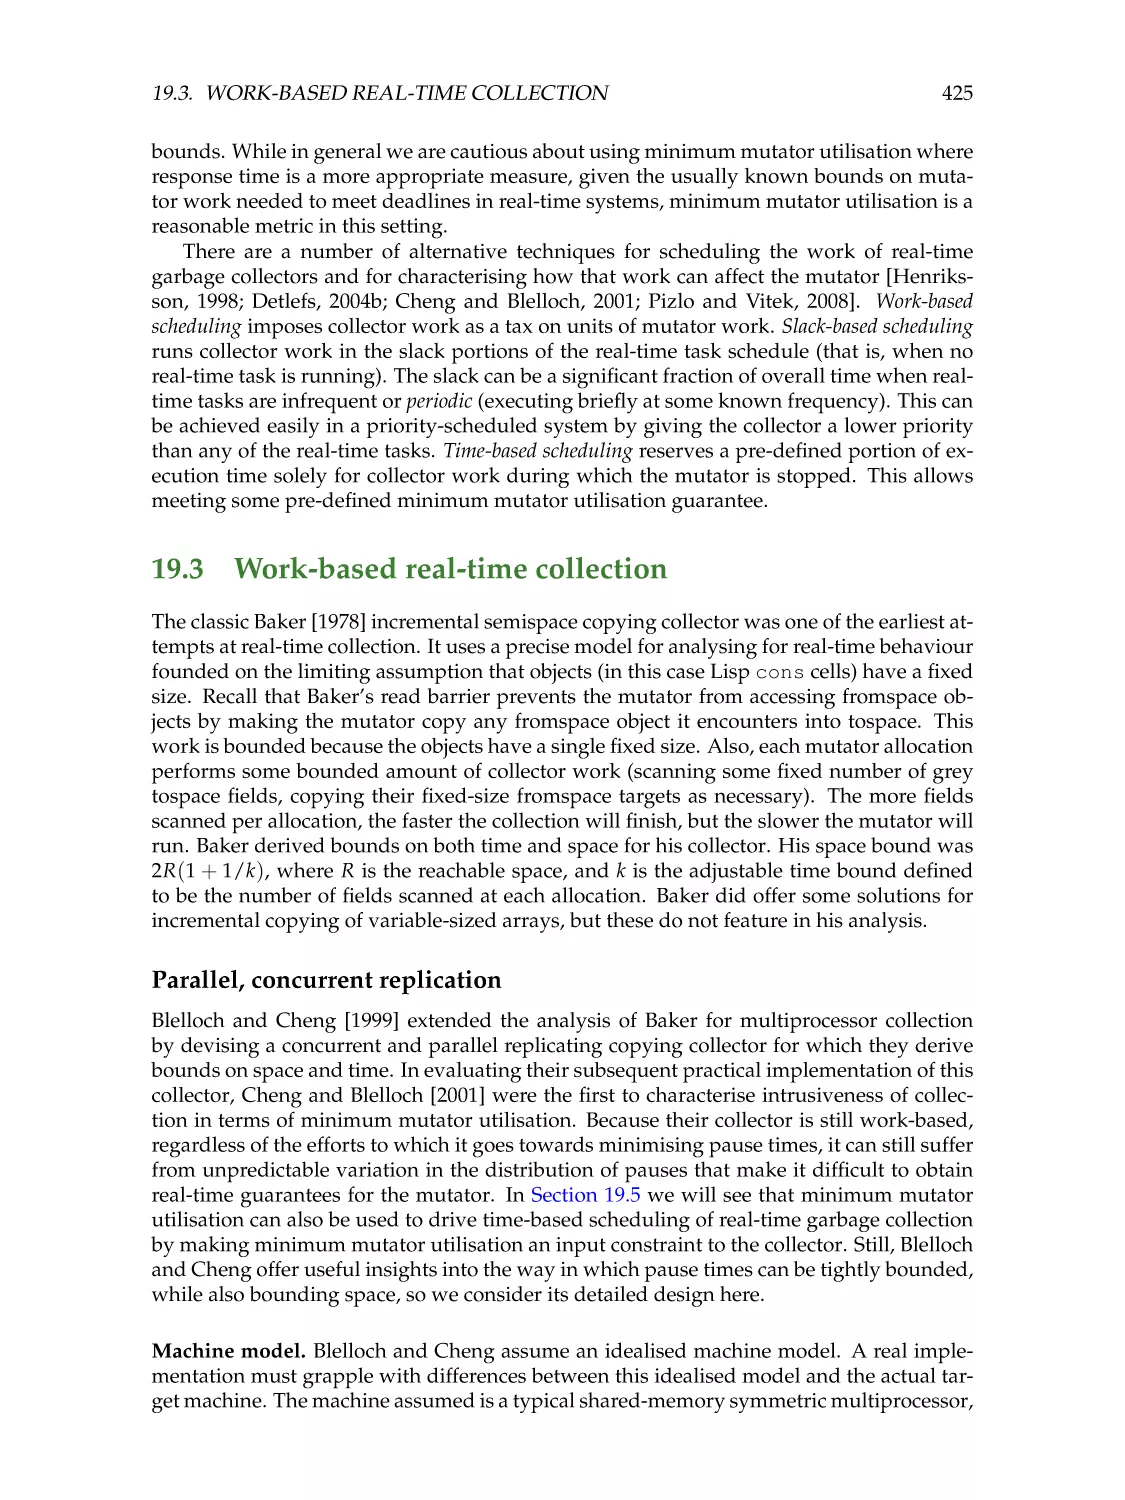 19.3. Work-based real-time collection
Parallel, concurrent replication